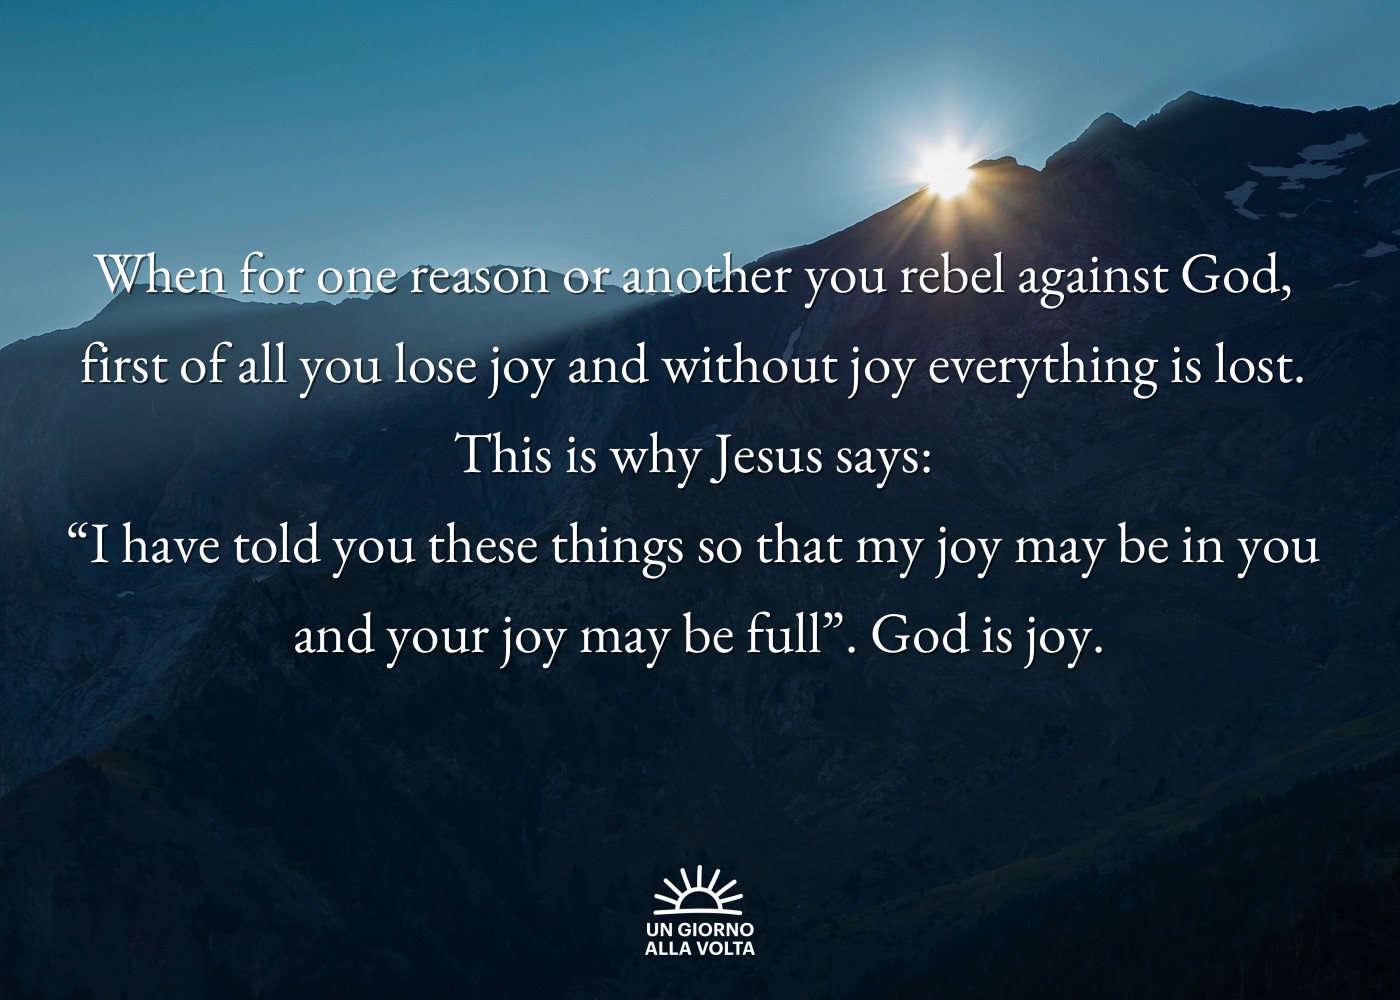 When for one reason or another you rebel against God, 
first of all you lose joy and without joy everything is lost. 
This is why Jesus says: 
“I have told you these things so that my joy may be in you 
and your joy may be full”. God is joy.
